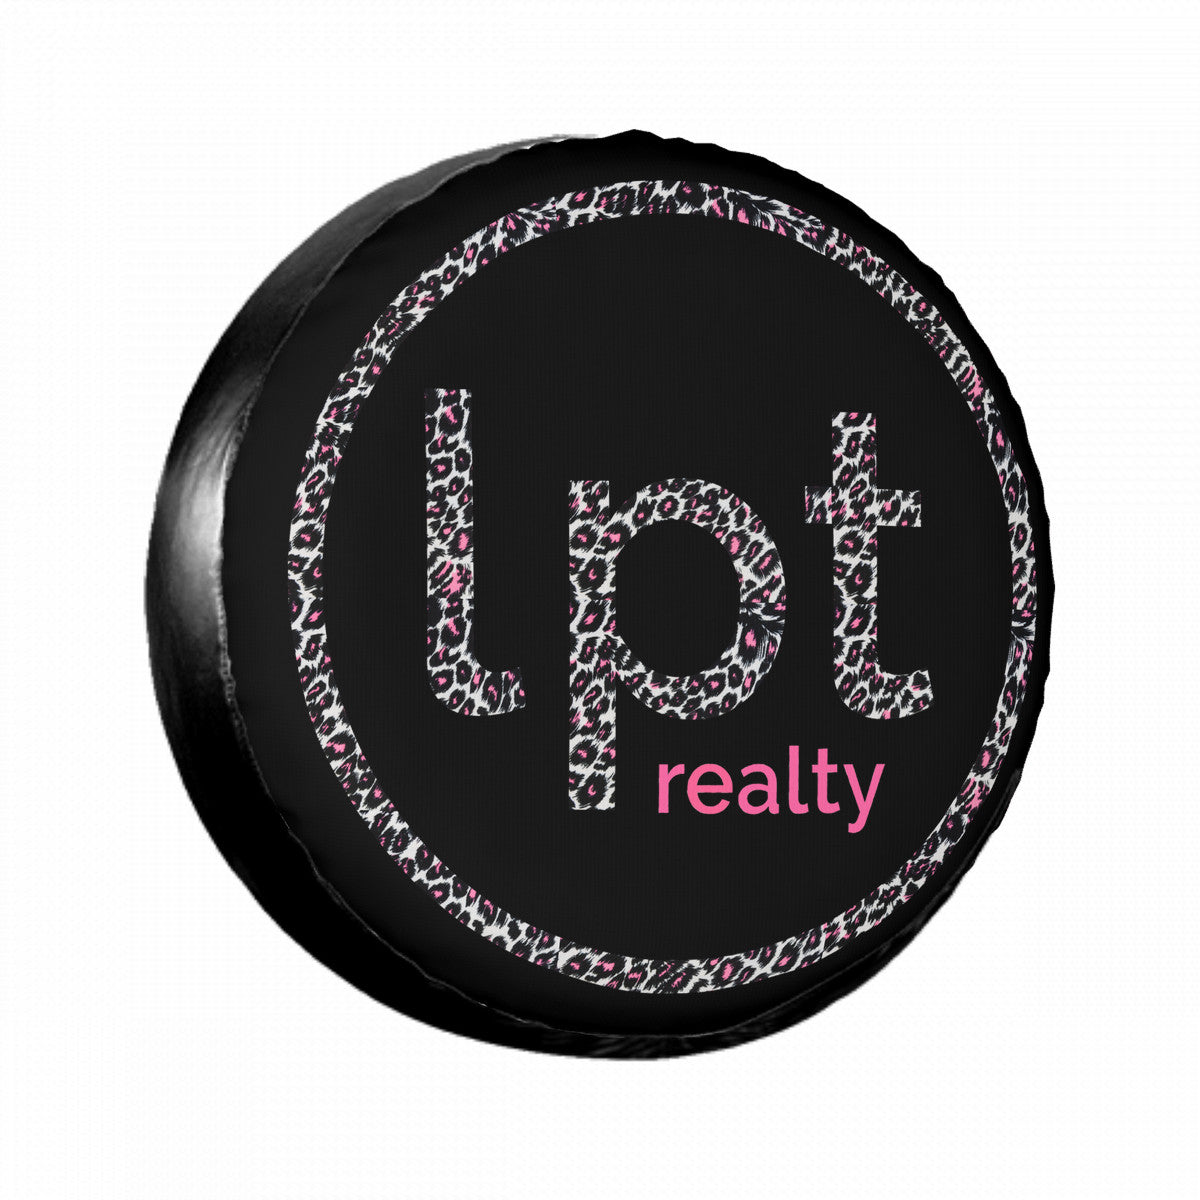 LPT Realty Logo in Pink & Black Leopard Print - Spare Tire Wheel Cover Sizes 14-17